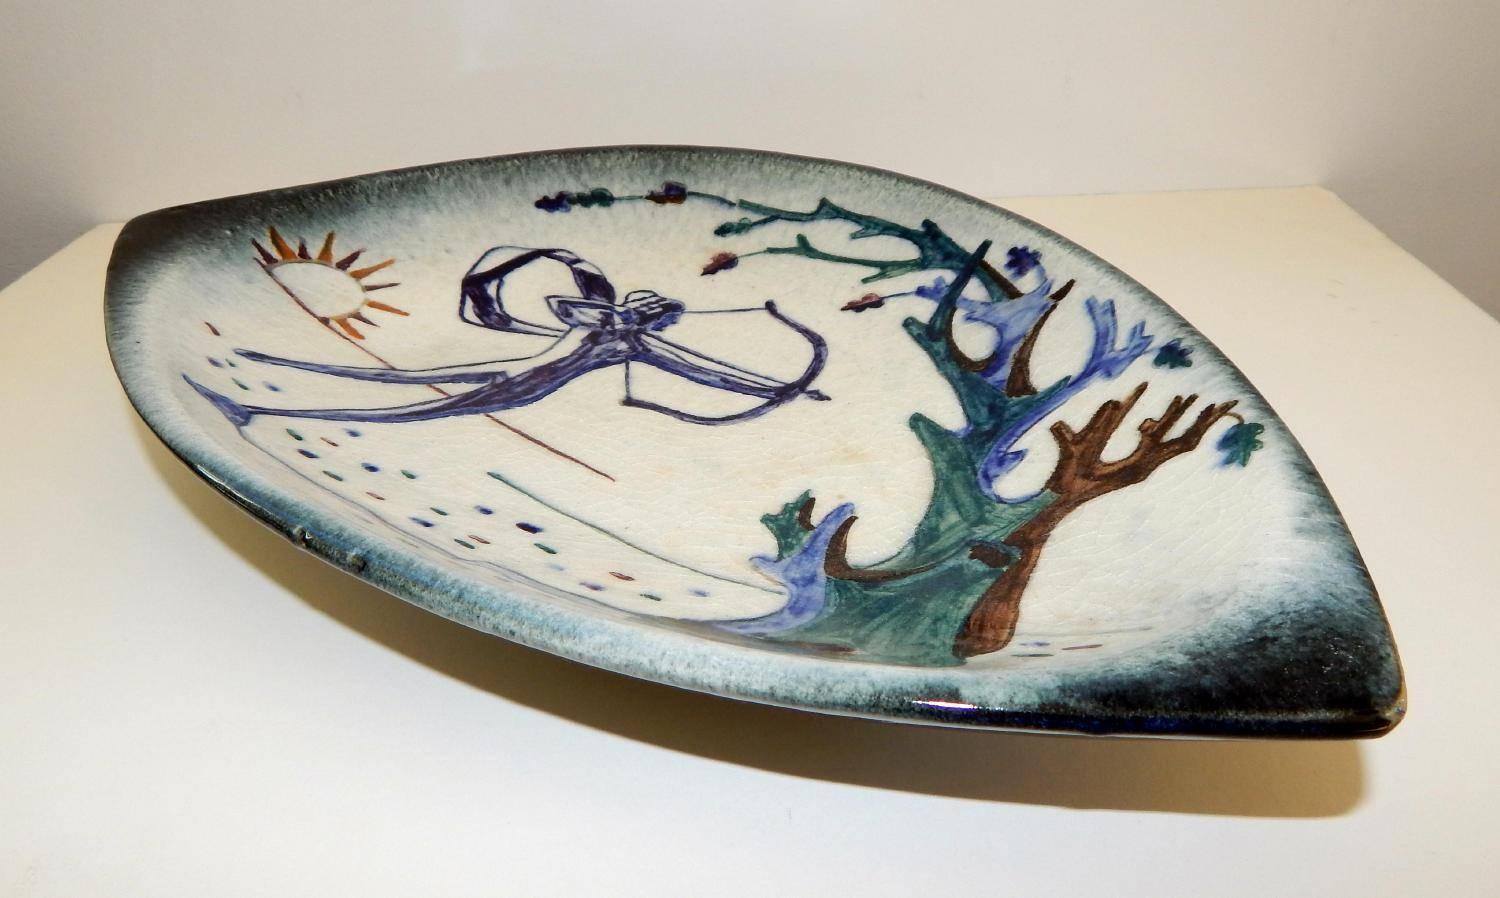 Beautiful ceramic tray depicting Diana the huntress.
Decorated by Alfonso Vila Shum (1897–1967)
Measures: 13 3/8 inches (length) x 9 inches (width).
Signed “SHUM” (faintly) lower right front and Stonelain pottery mark on the base with the